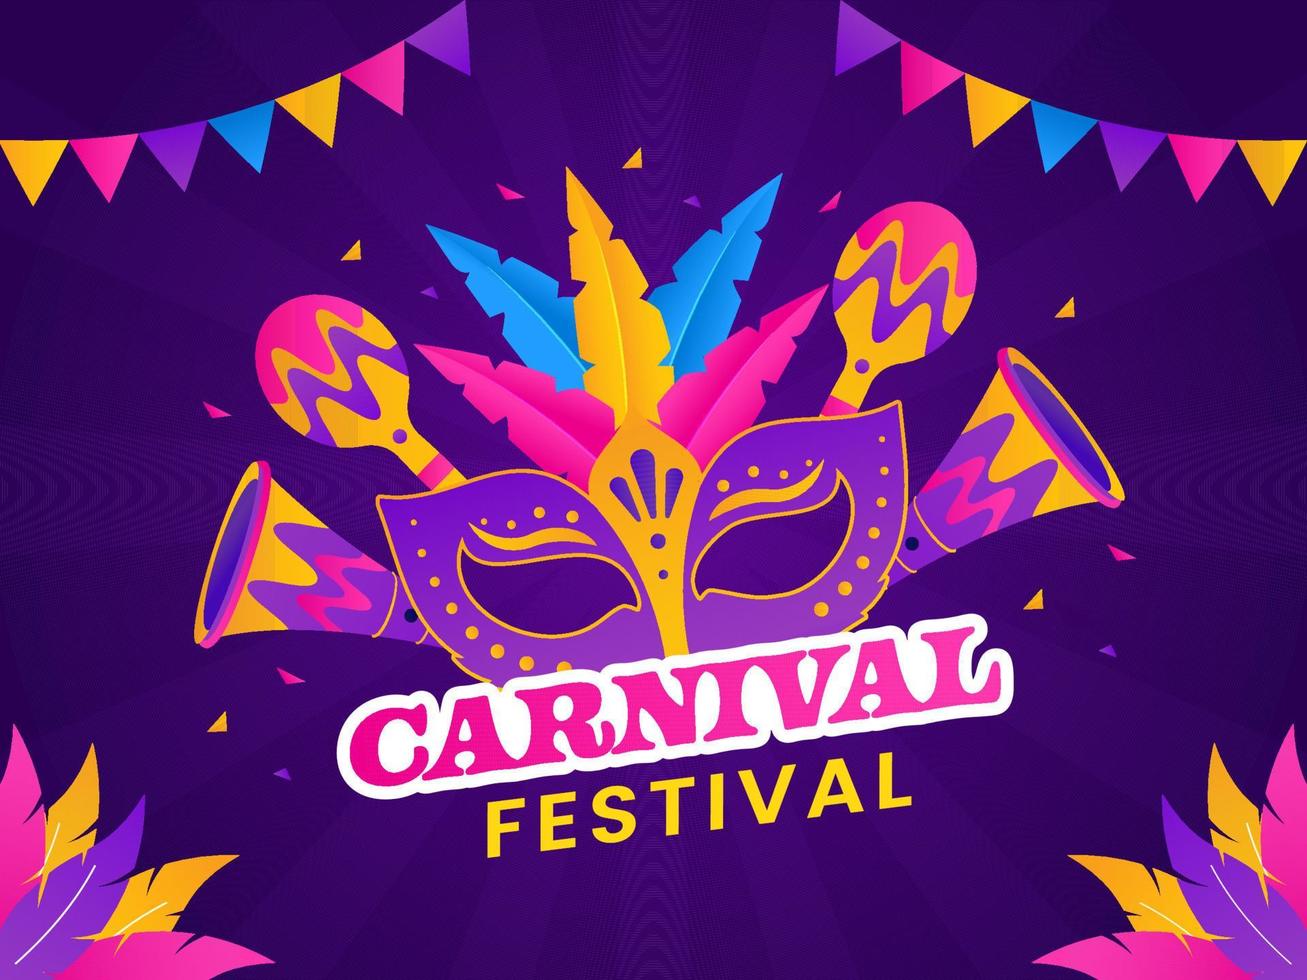 Carnival Festival Elements Decorated On Purple Rays Background With Bunting Flags. vector